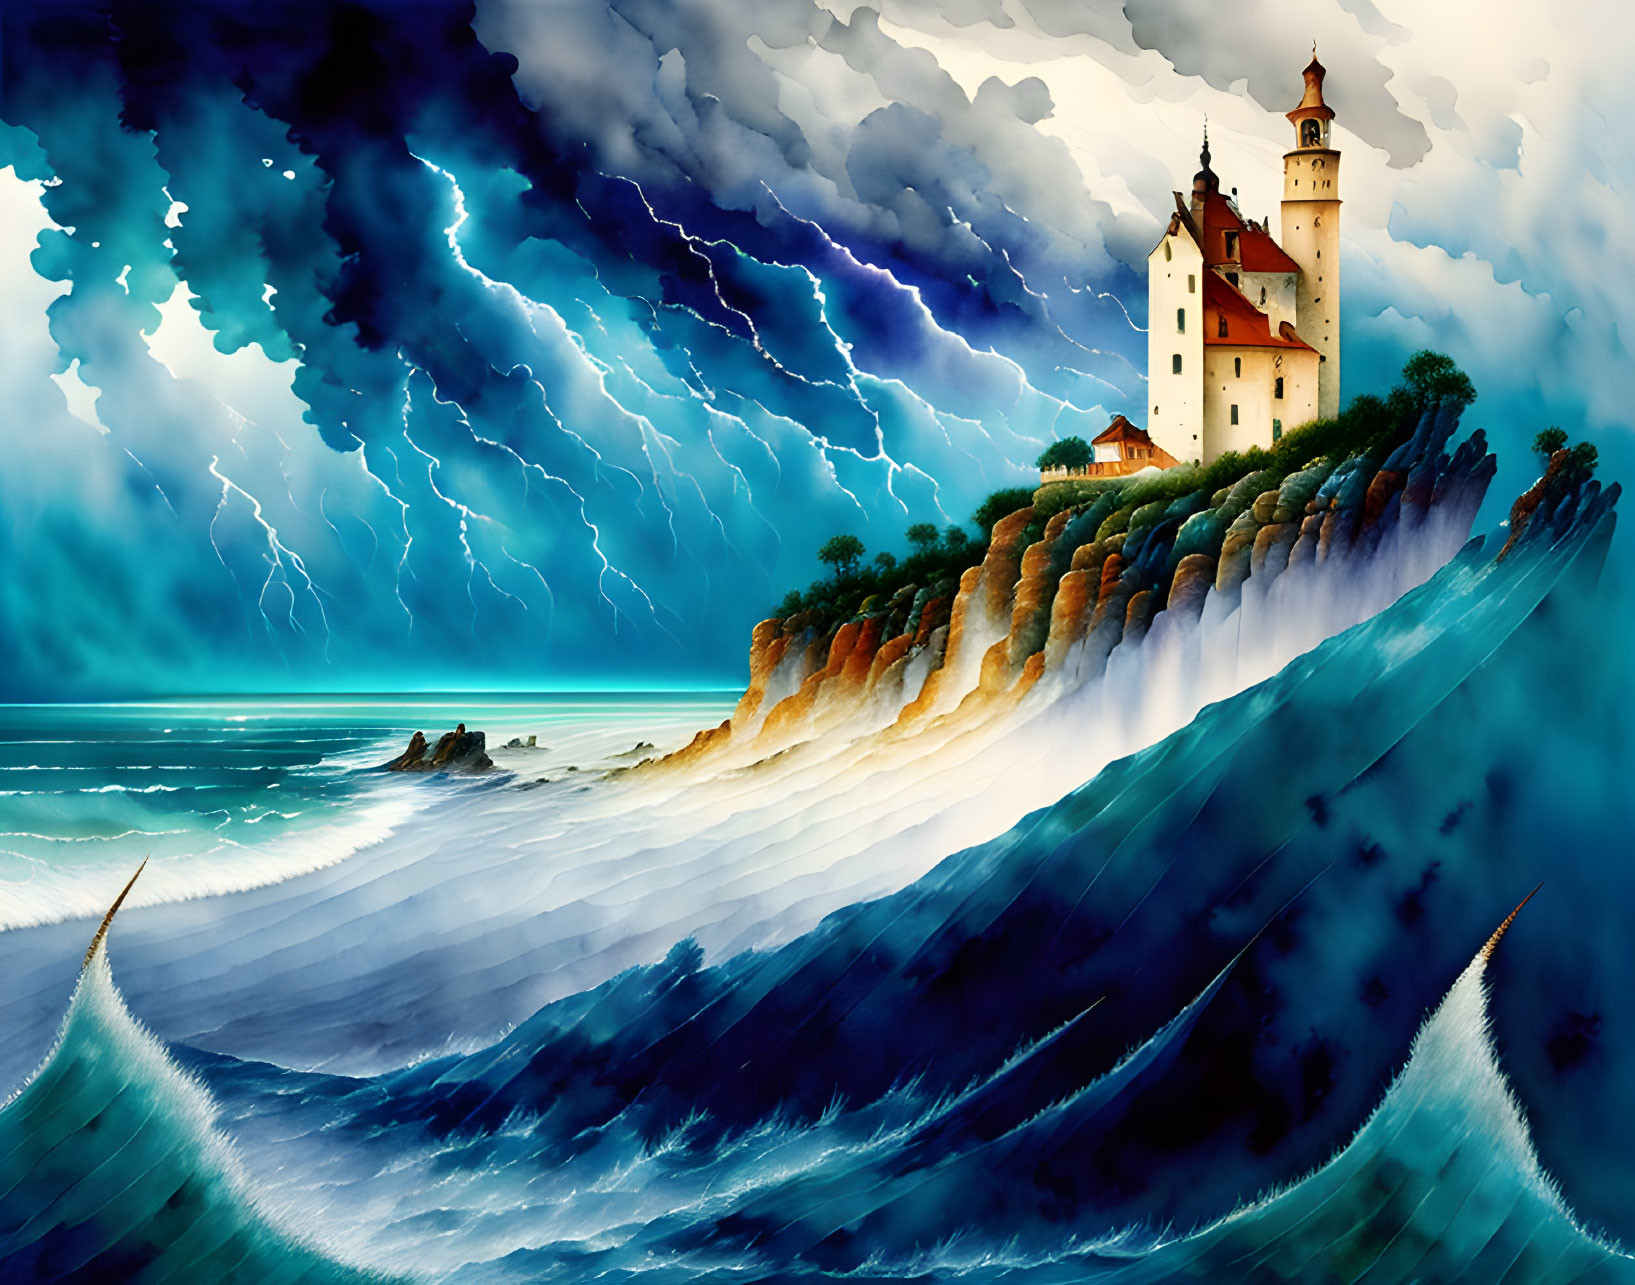 Cliffside castle overlooking stormy sea with lightning.